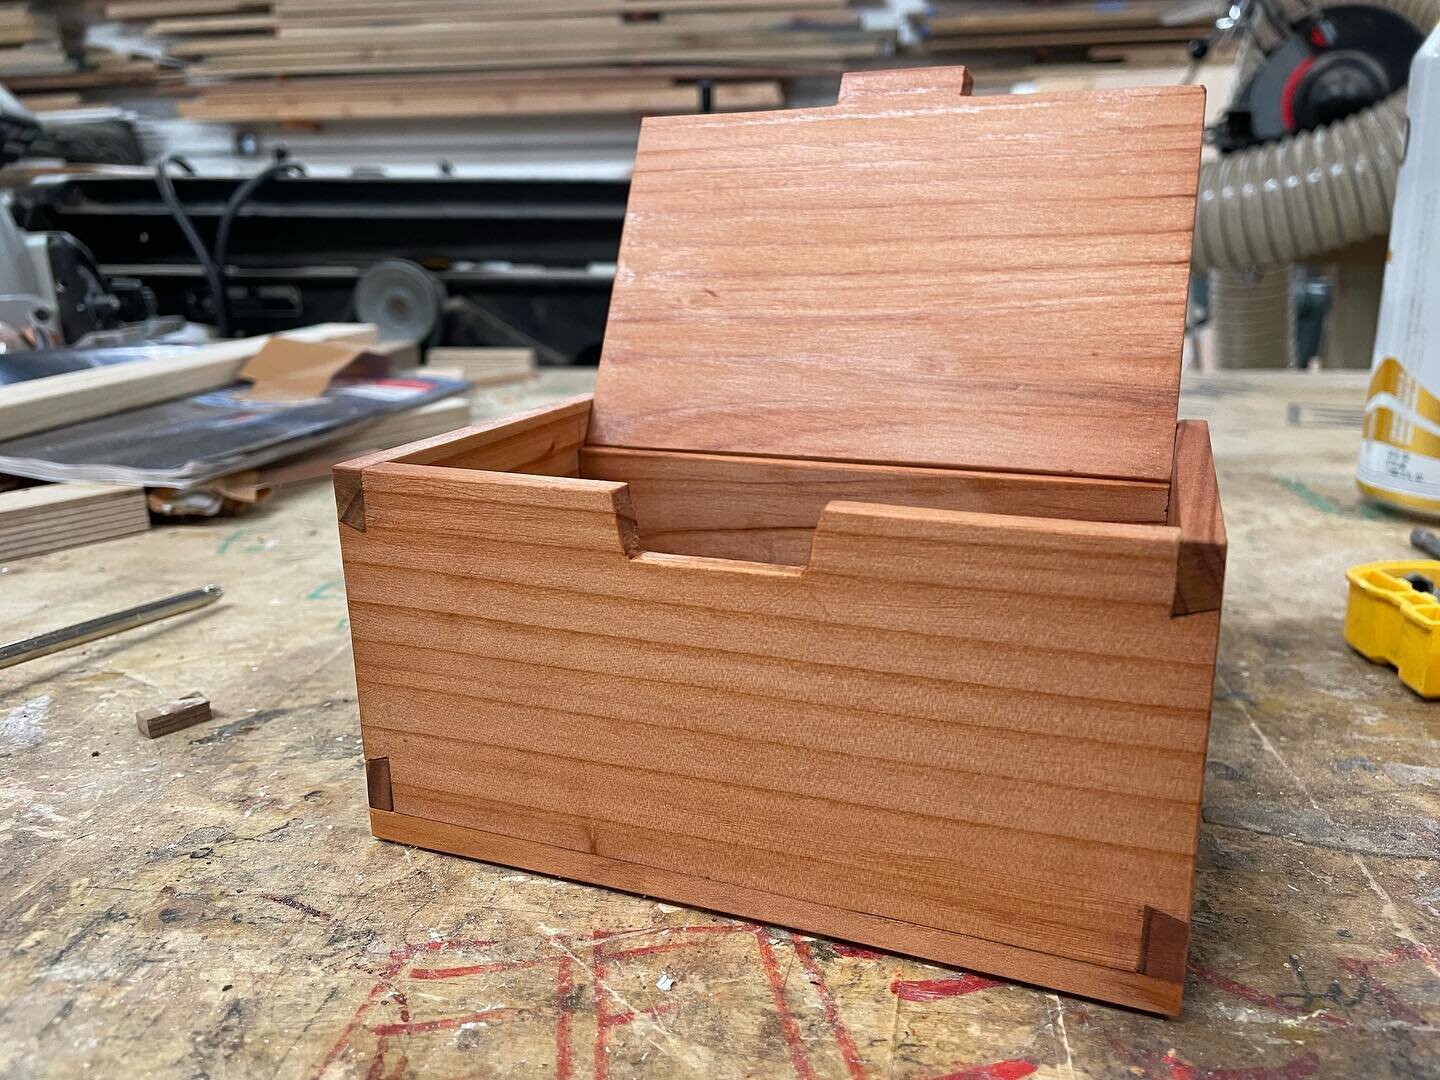 Little salt box turned out nicely.
#dovetails #woodworking